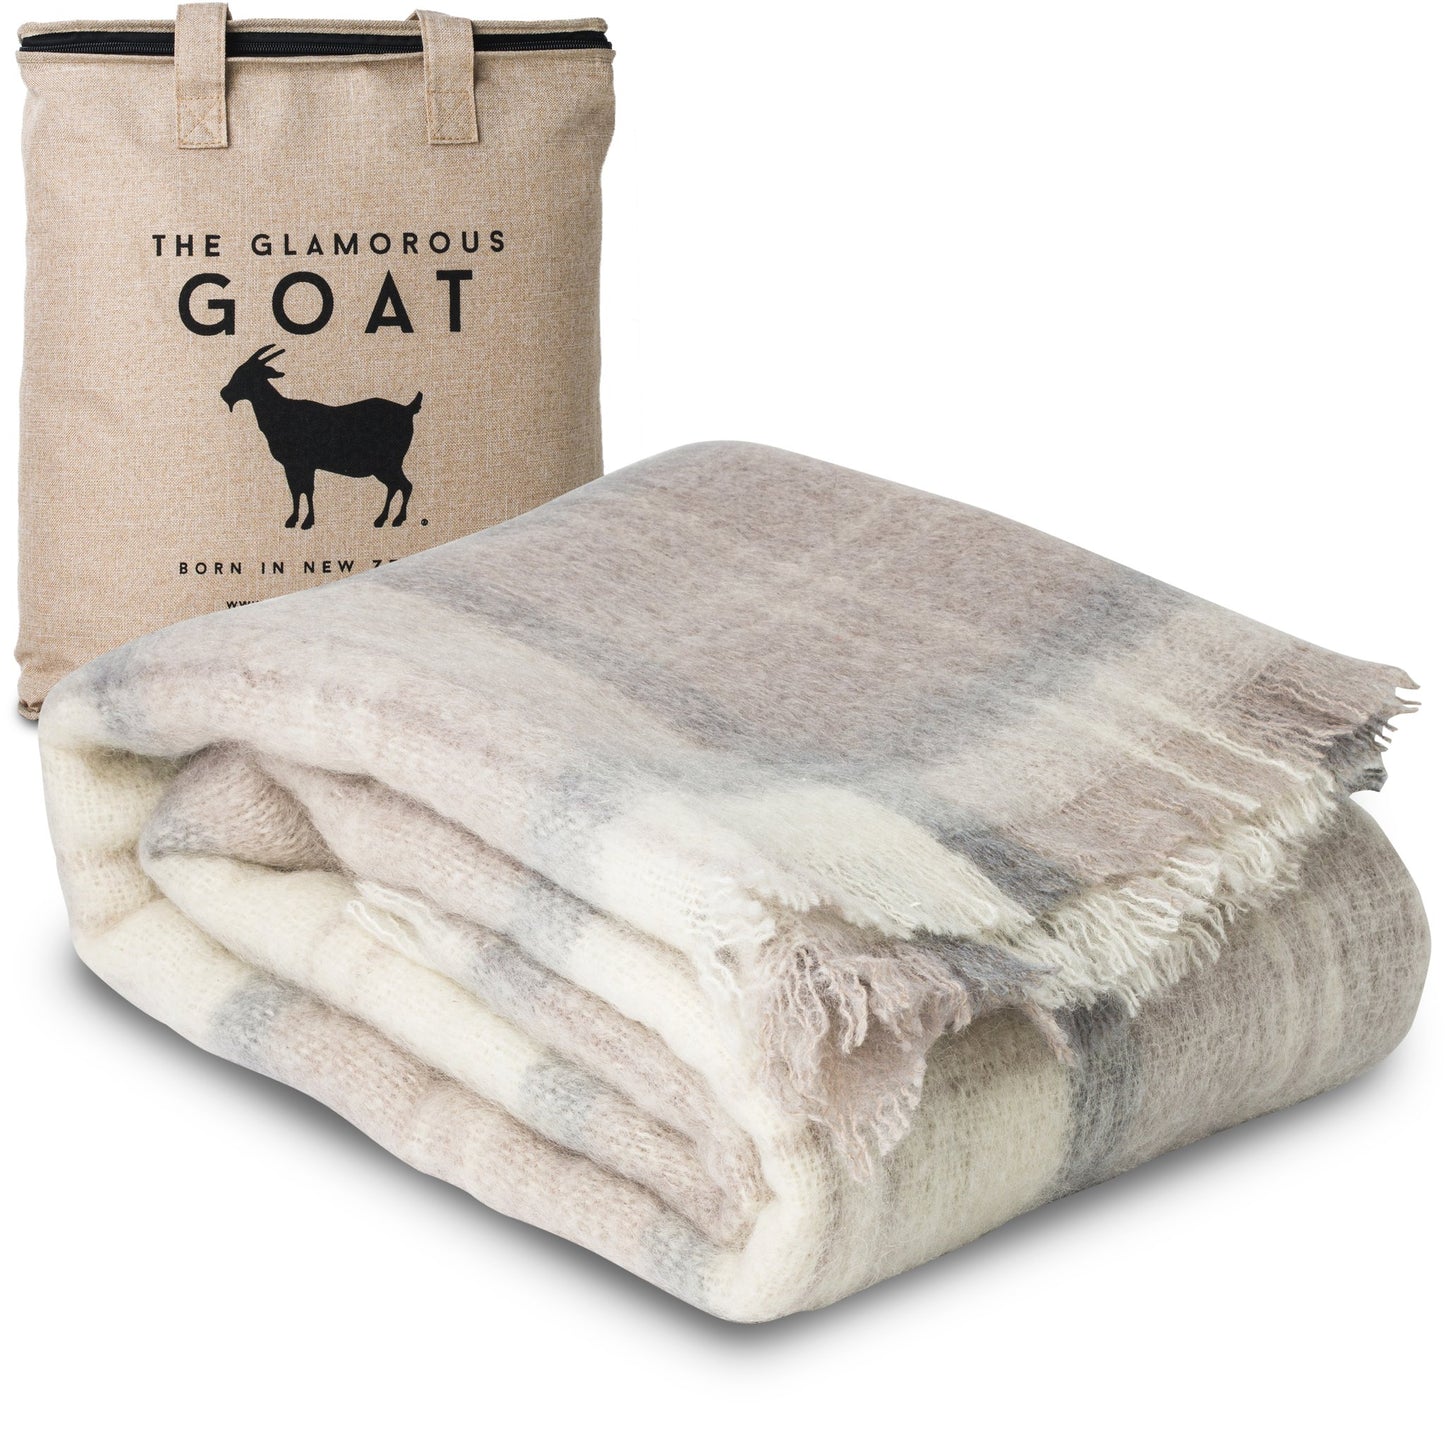 Soft Mohair luxury throws from Glamorous Goat in Wanaka Earth beige and grey chec. Angora kid mohair throws available at My Sanctuary